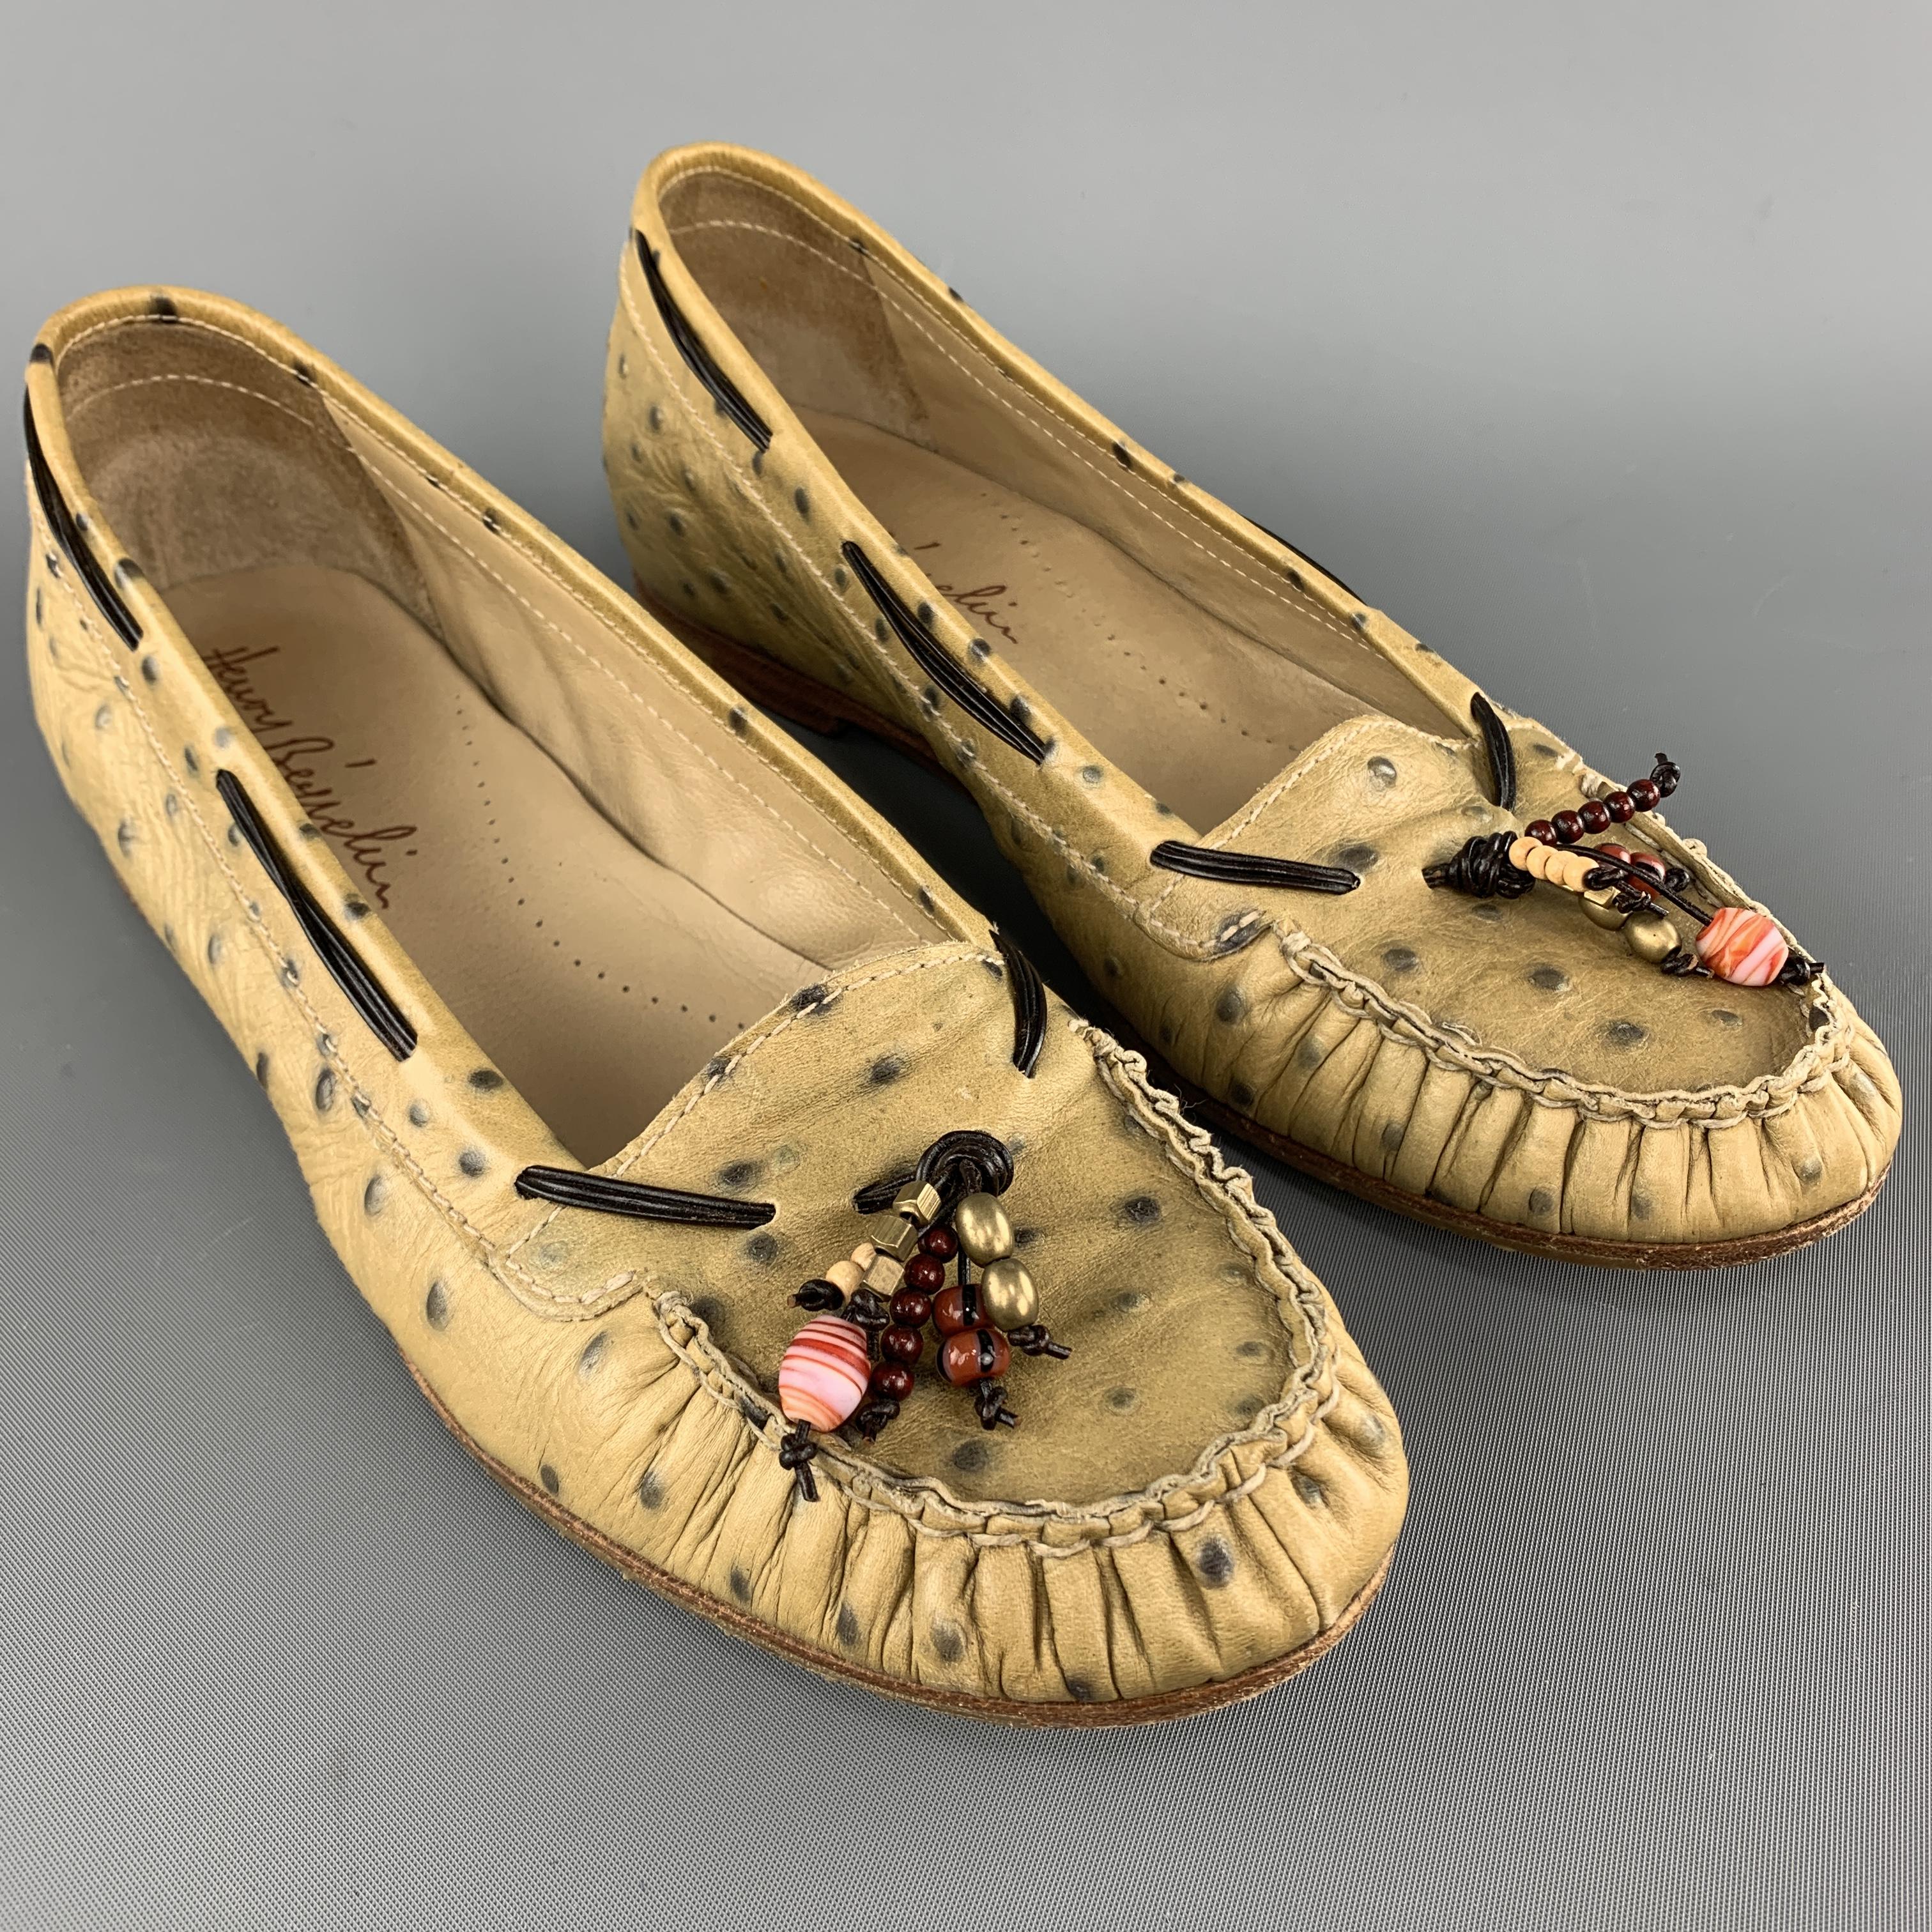 HENRY BEGUELIN loafers come in muted green beige ostrich leather with woven trim and beaded tassel. Handmade in Italy.

Excellent Pre-Owned Condition.
Marked: IT 36.5

Outsole: 10 x 3.5 in.